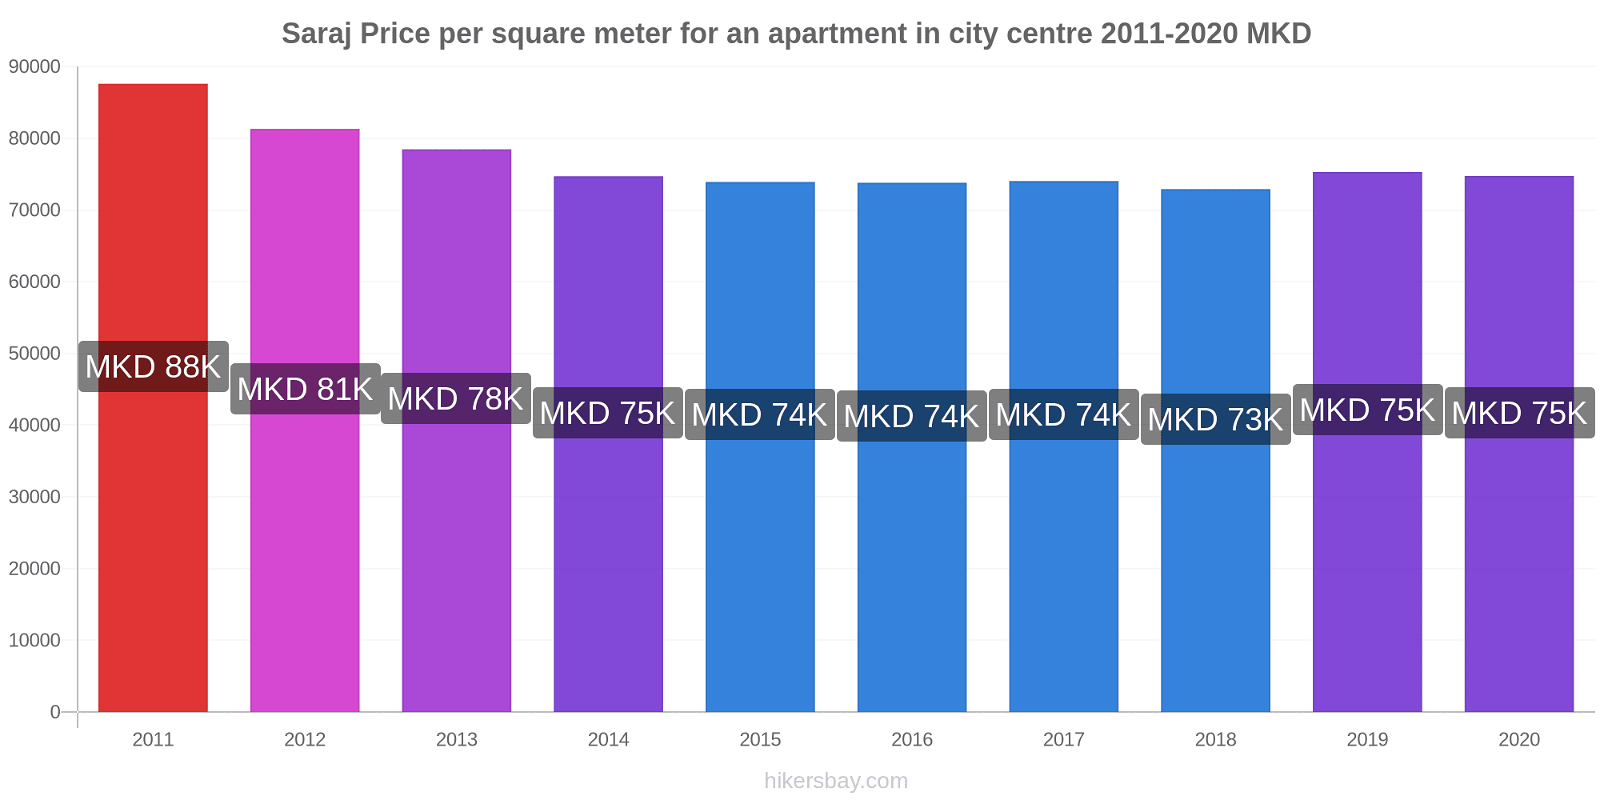 Saraj price changes Price per square meter for an apartment in city centre hikersbay.com